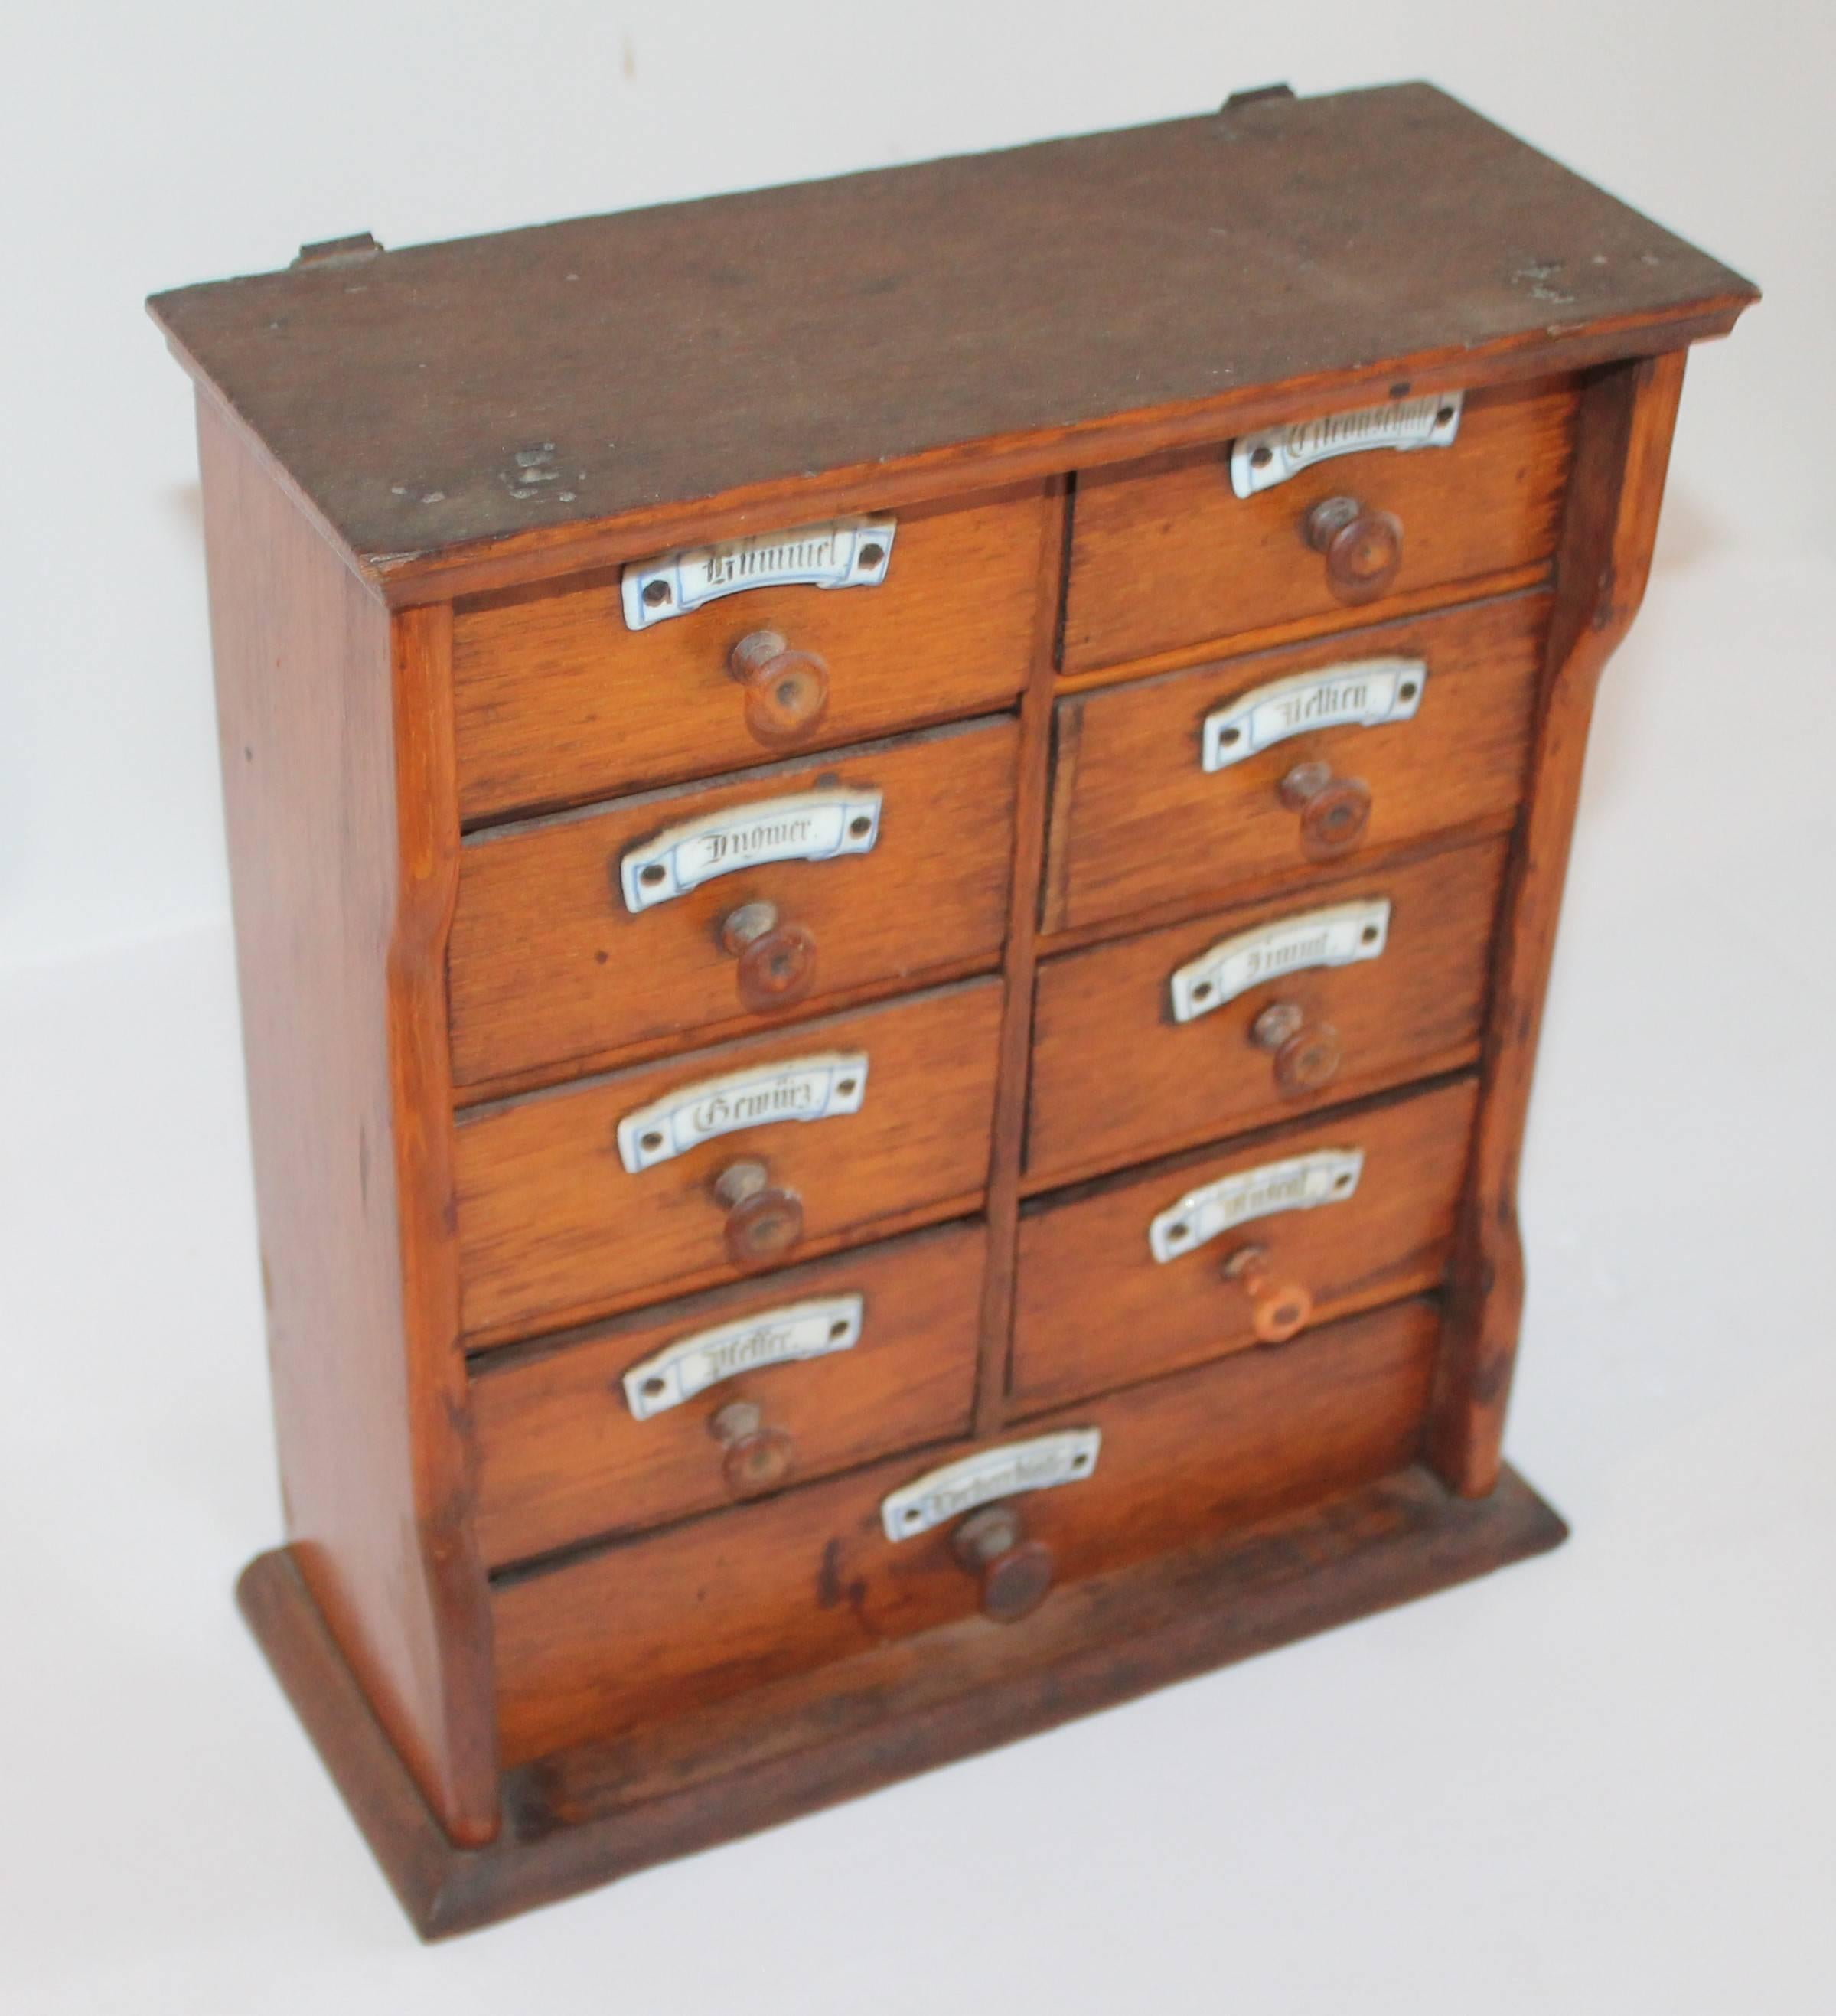 This pristine 19th century handmade German spice box with original ironstone labels is in amazing condition. This item is all original from the drawers, knobs and individual ironstone labels for each drawer. There is amazing patina on this spice box